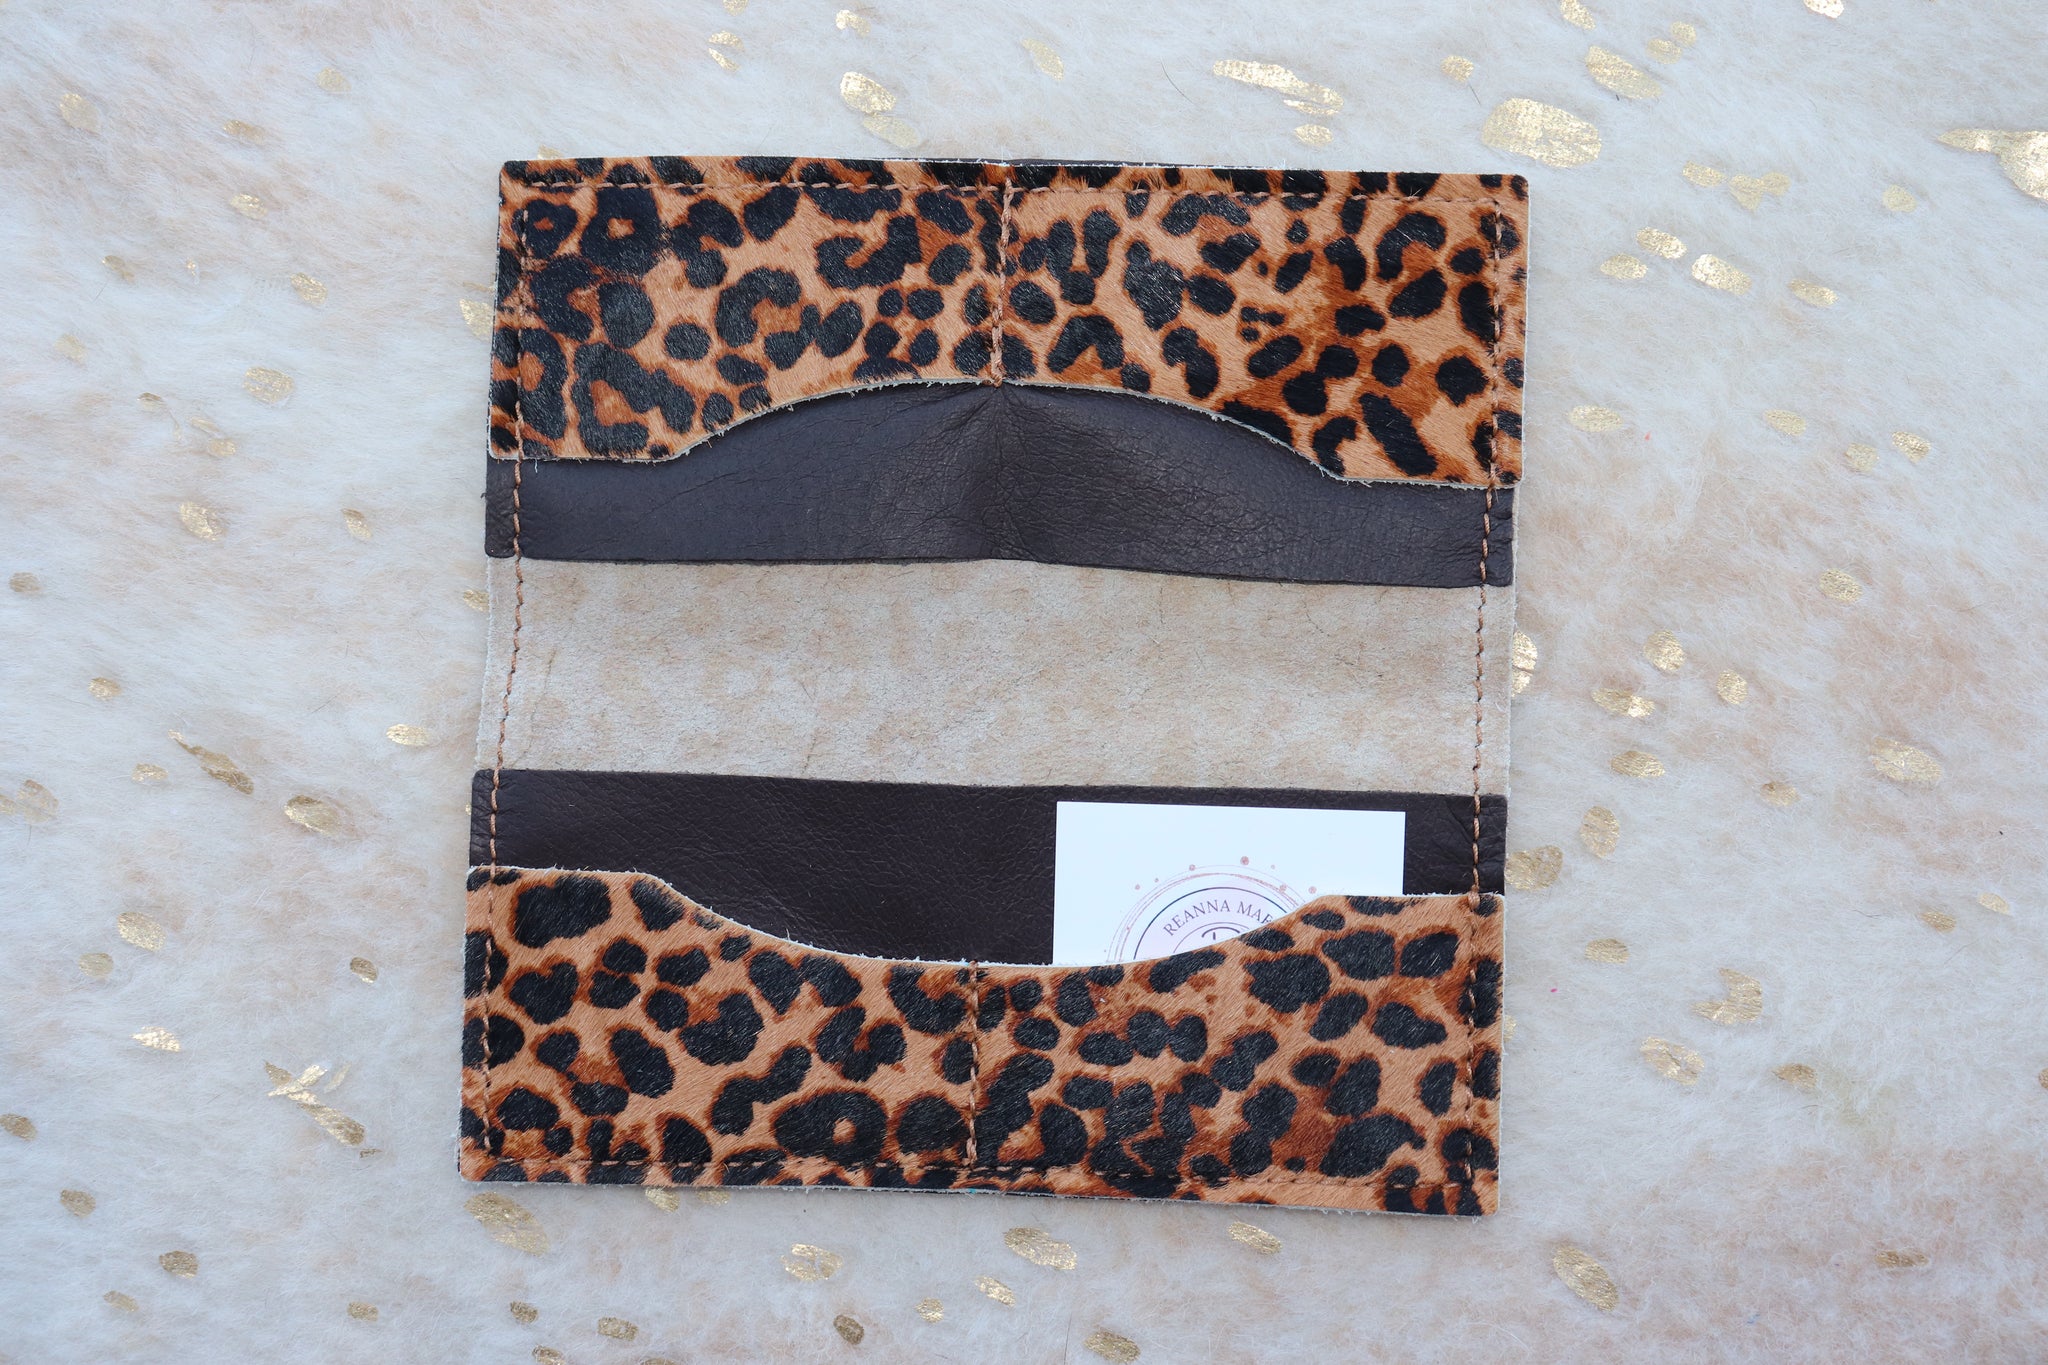 Hair-On-Hide Leather Leopard Print Wallet W/ Turquoise Slab